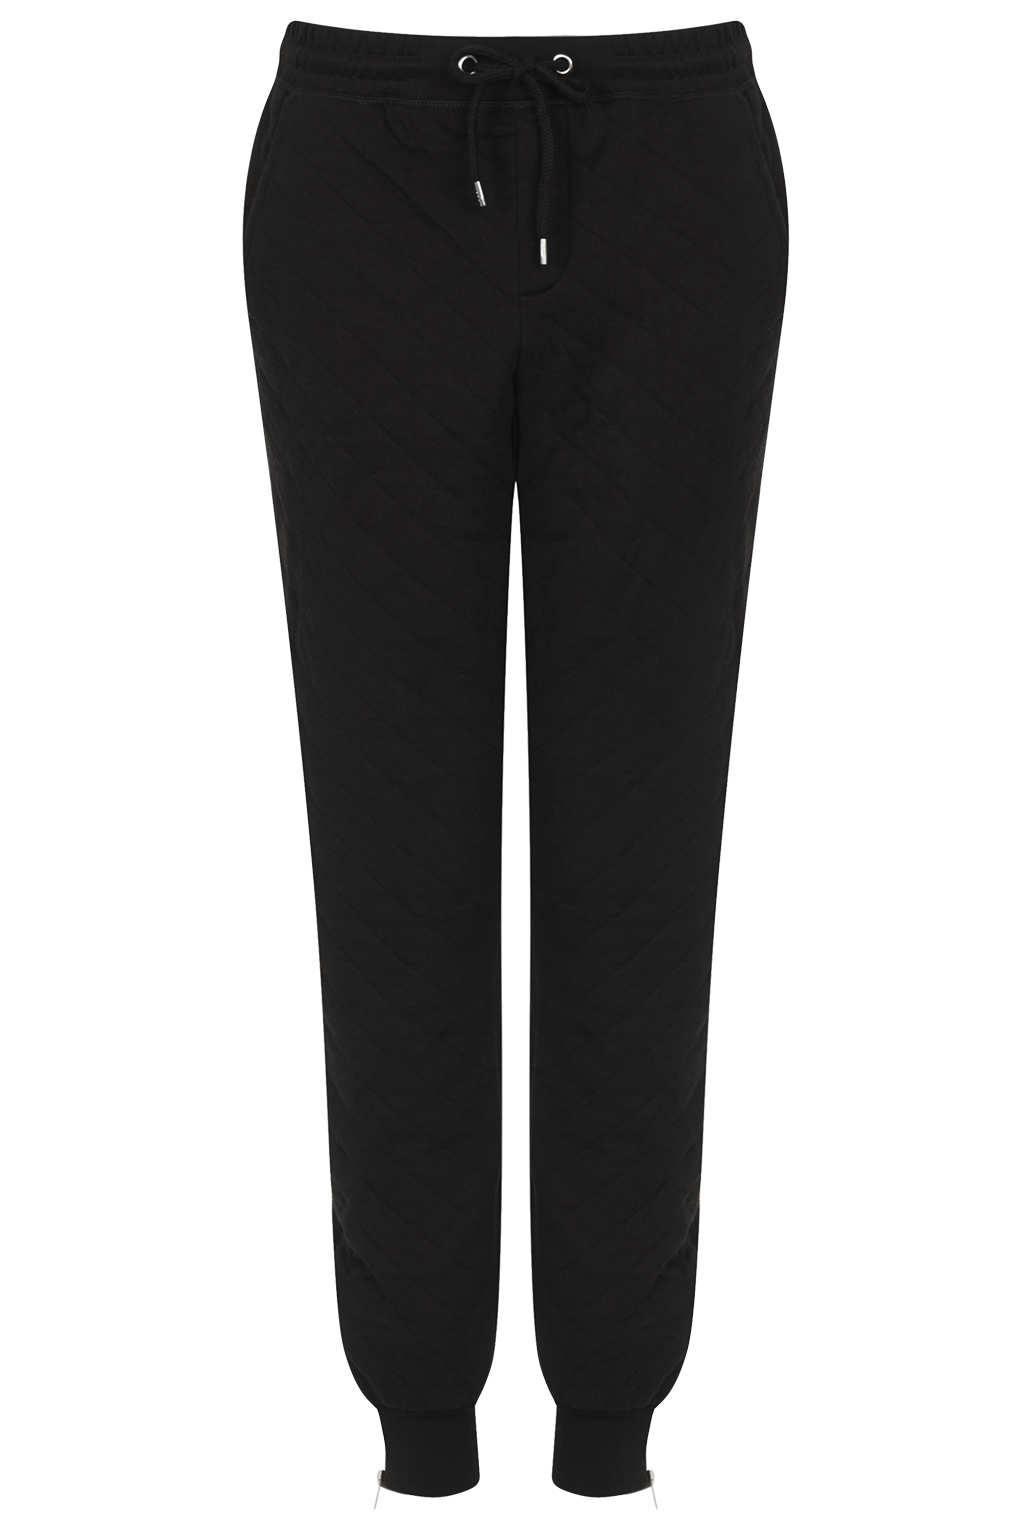 Lyst - Topshop Soft Black Quilted Joggers in Black